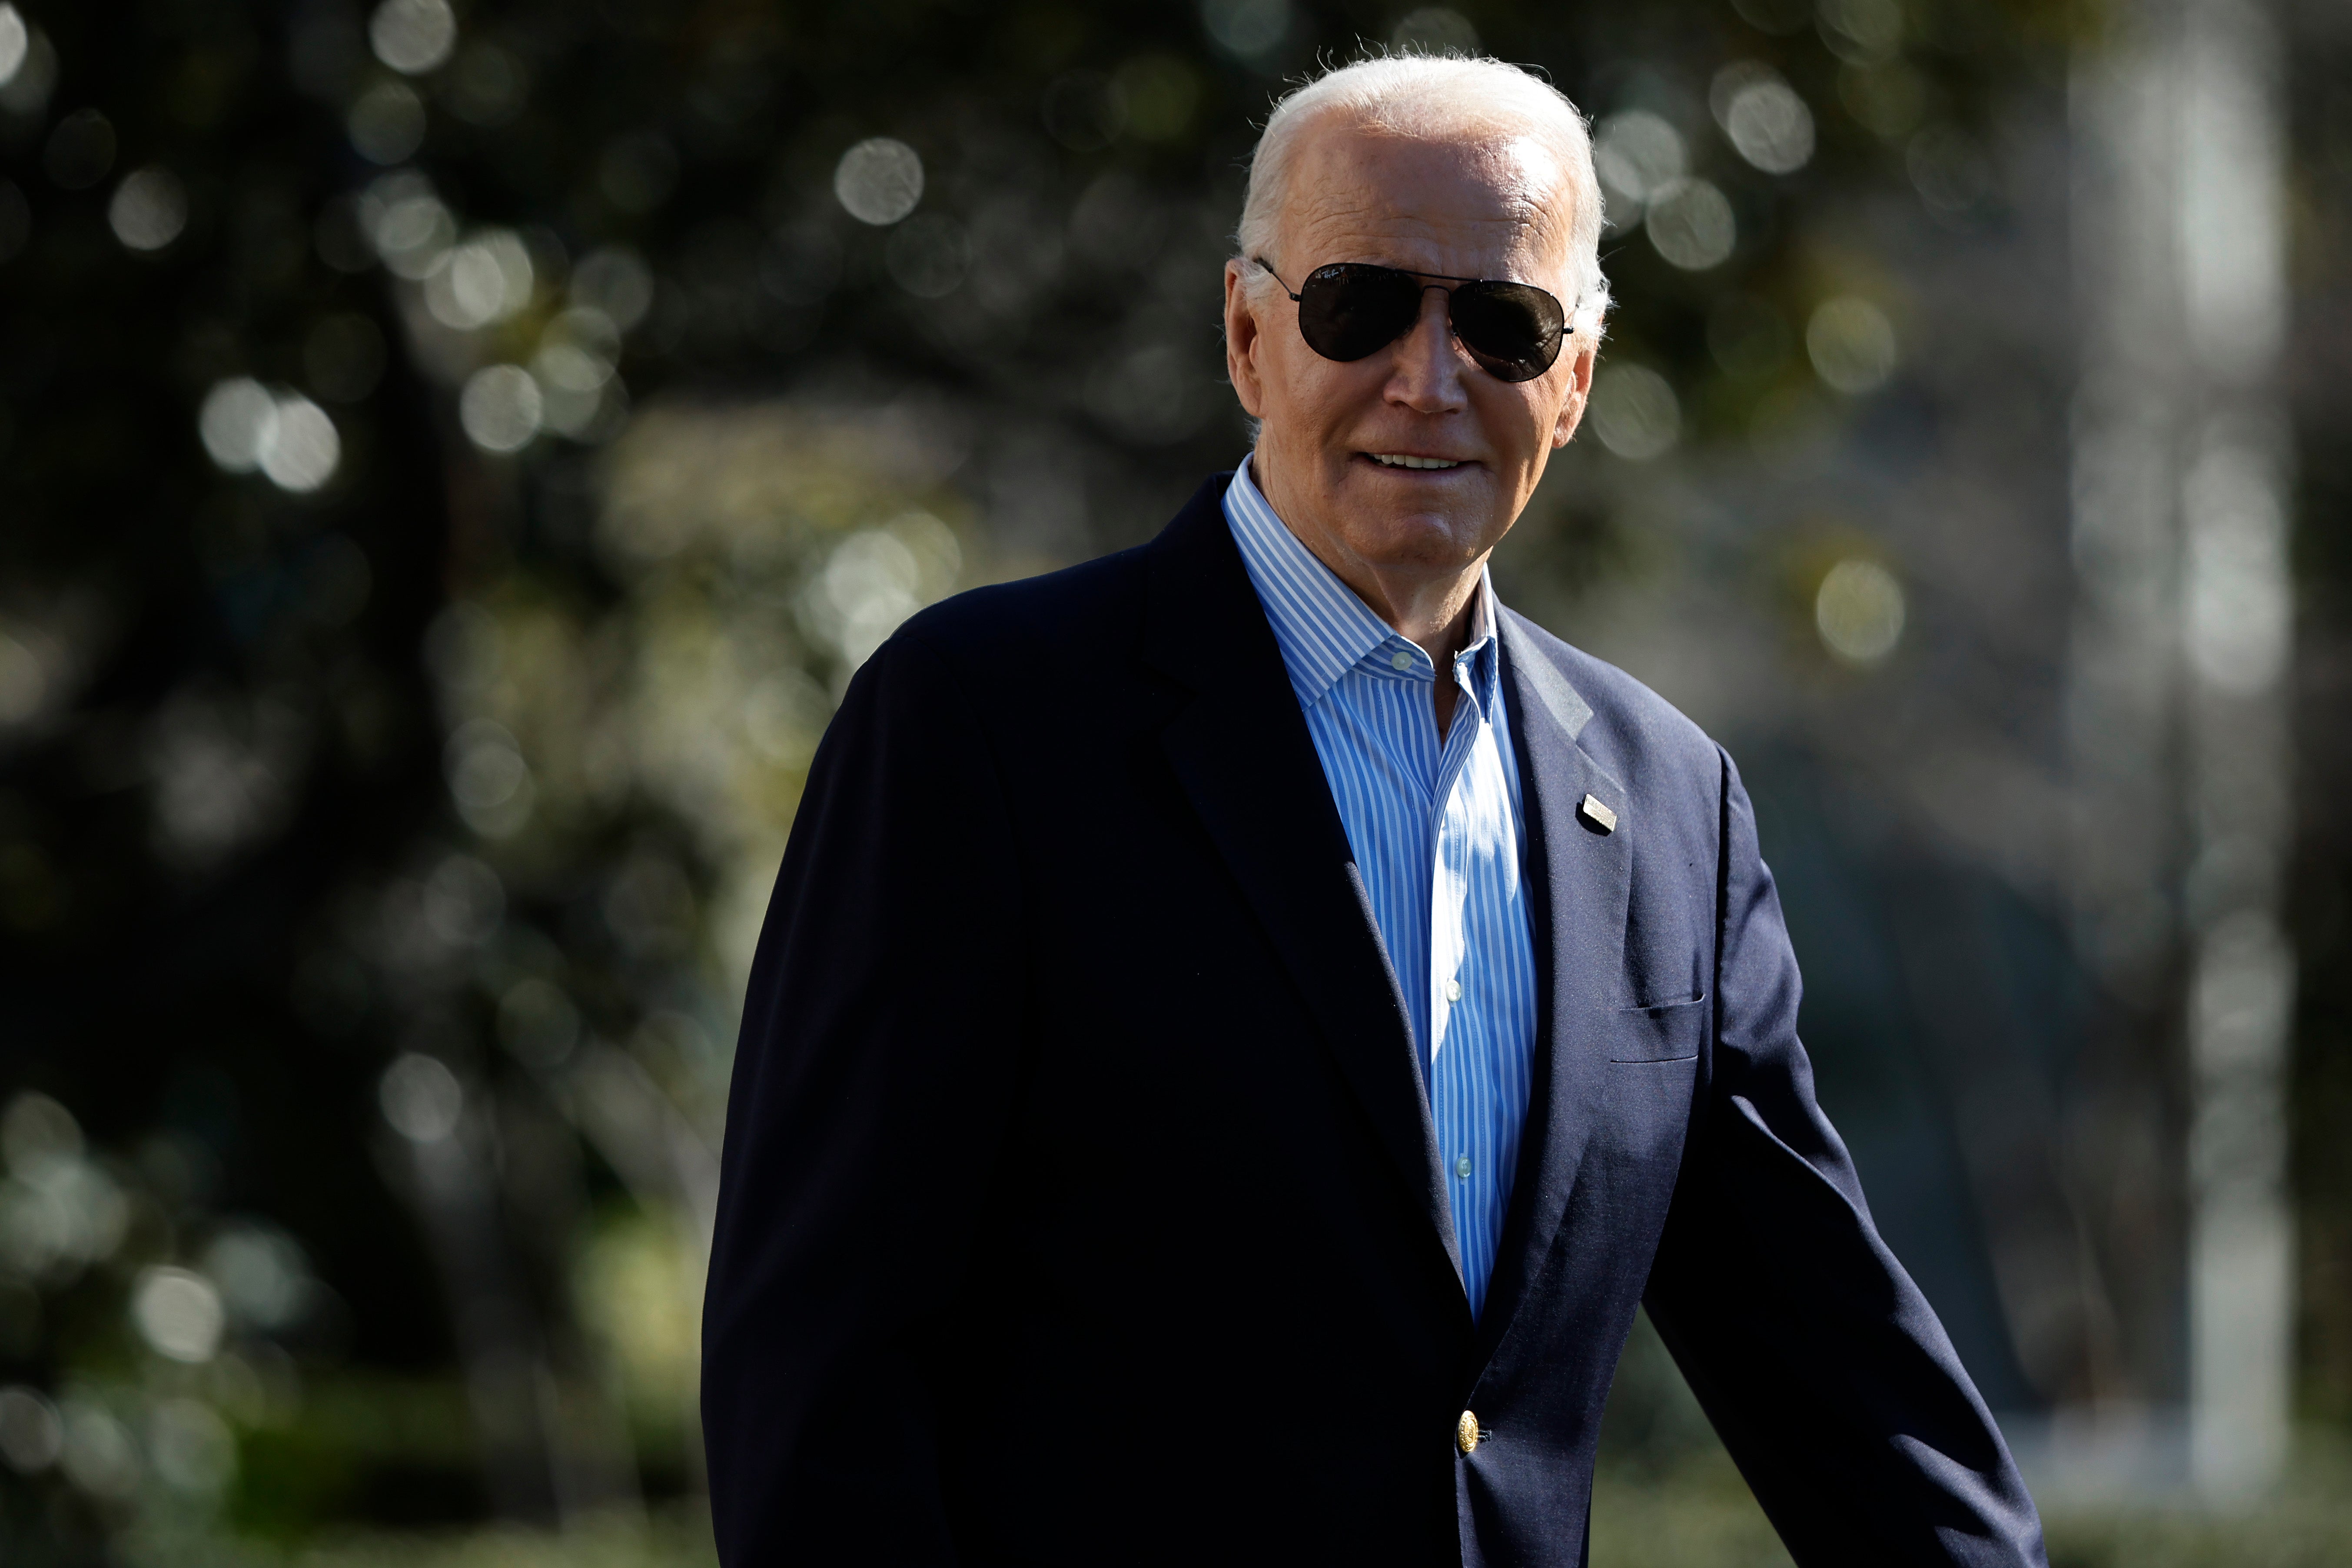 The White House has formally called on Fox News to walk back its coverage of bribery and corruption allegations against president Joe Biden